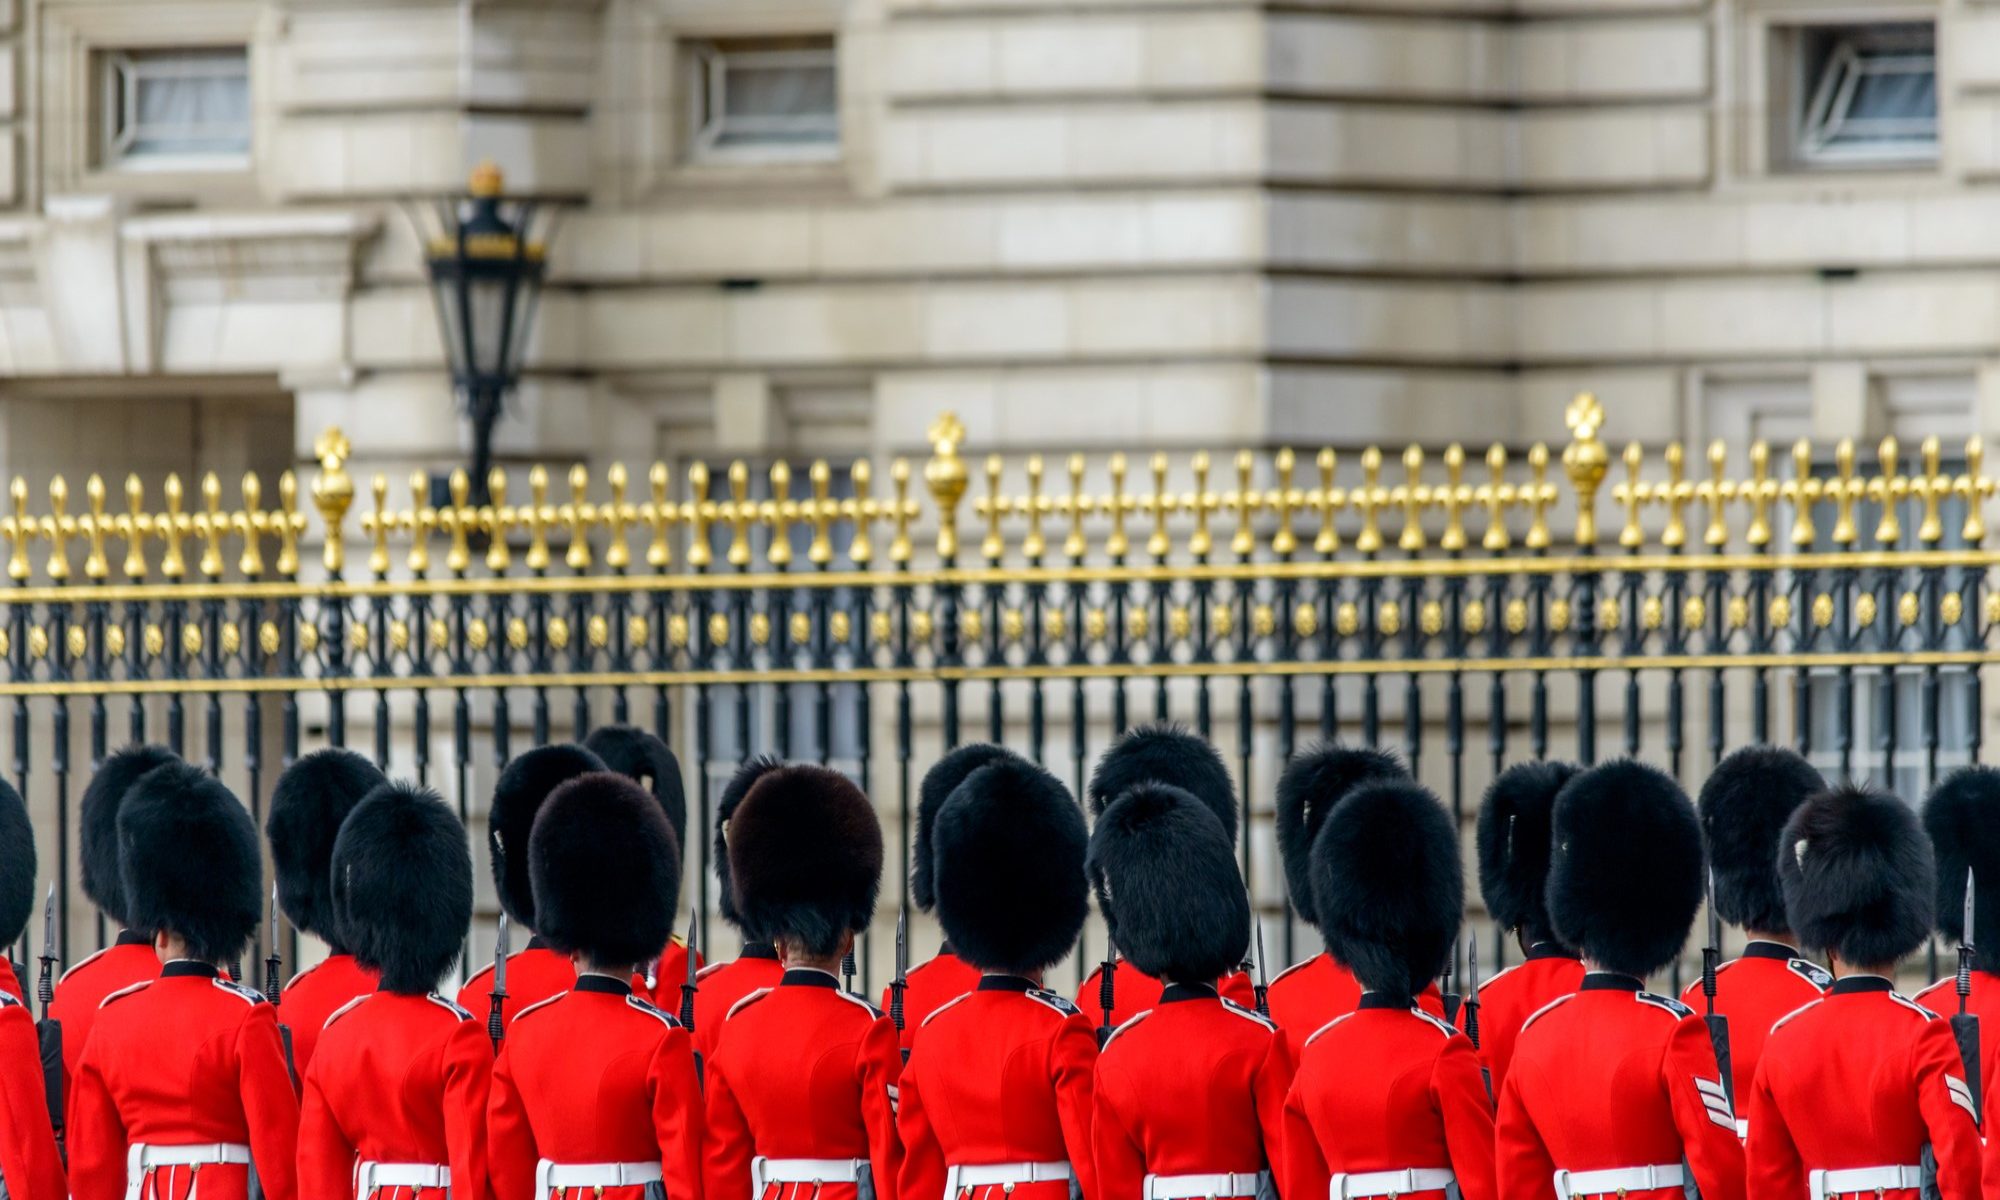 photograph of Queen's Guard in formation at Buckingham Palace